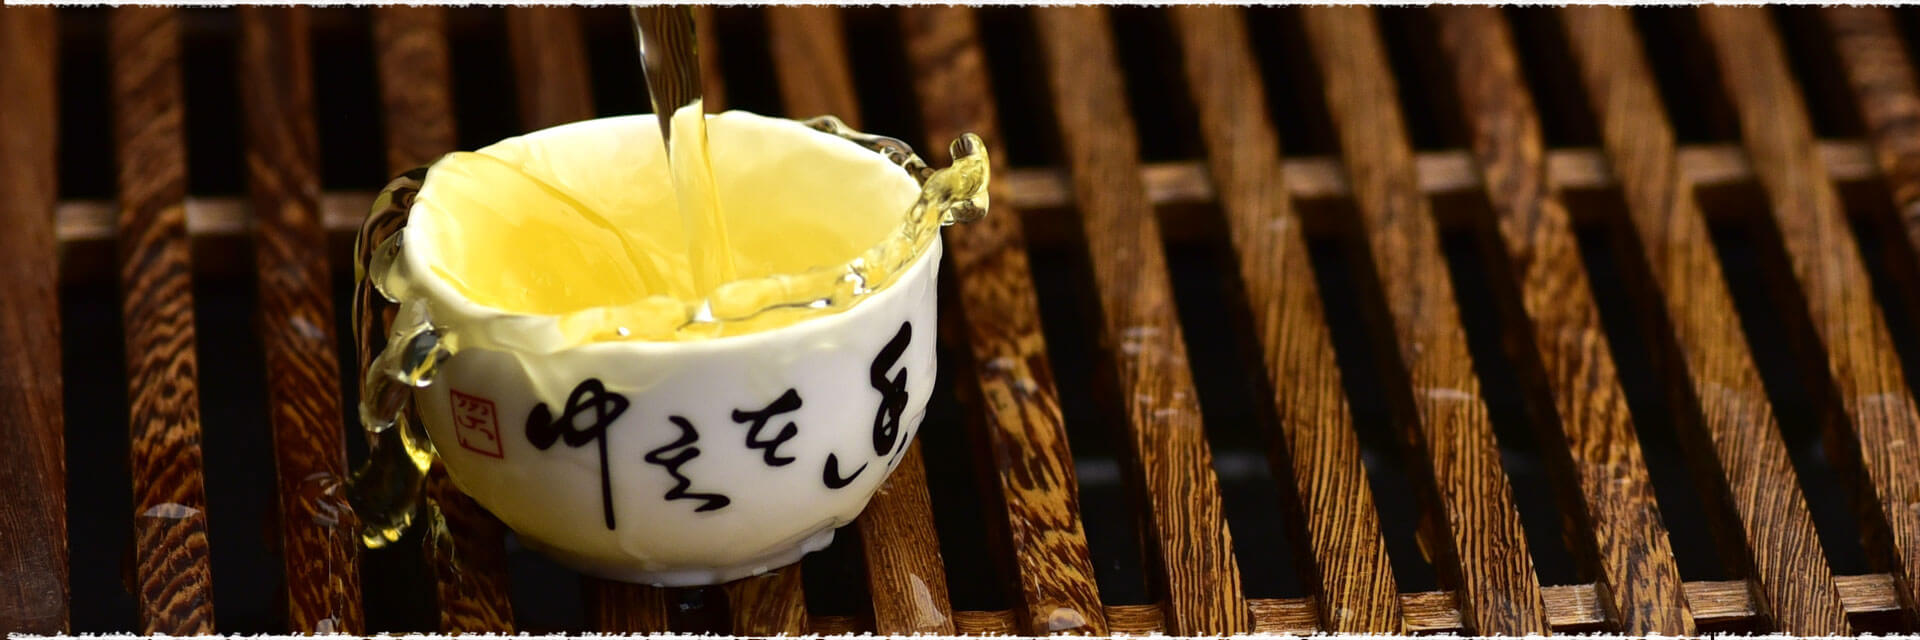 Chinese Tea History Part Ⅴ- The History of Taiwanese Teas